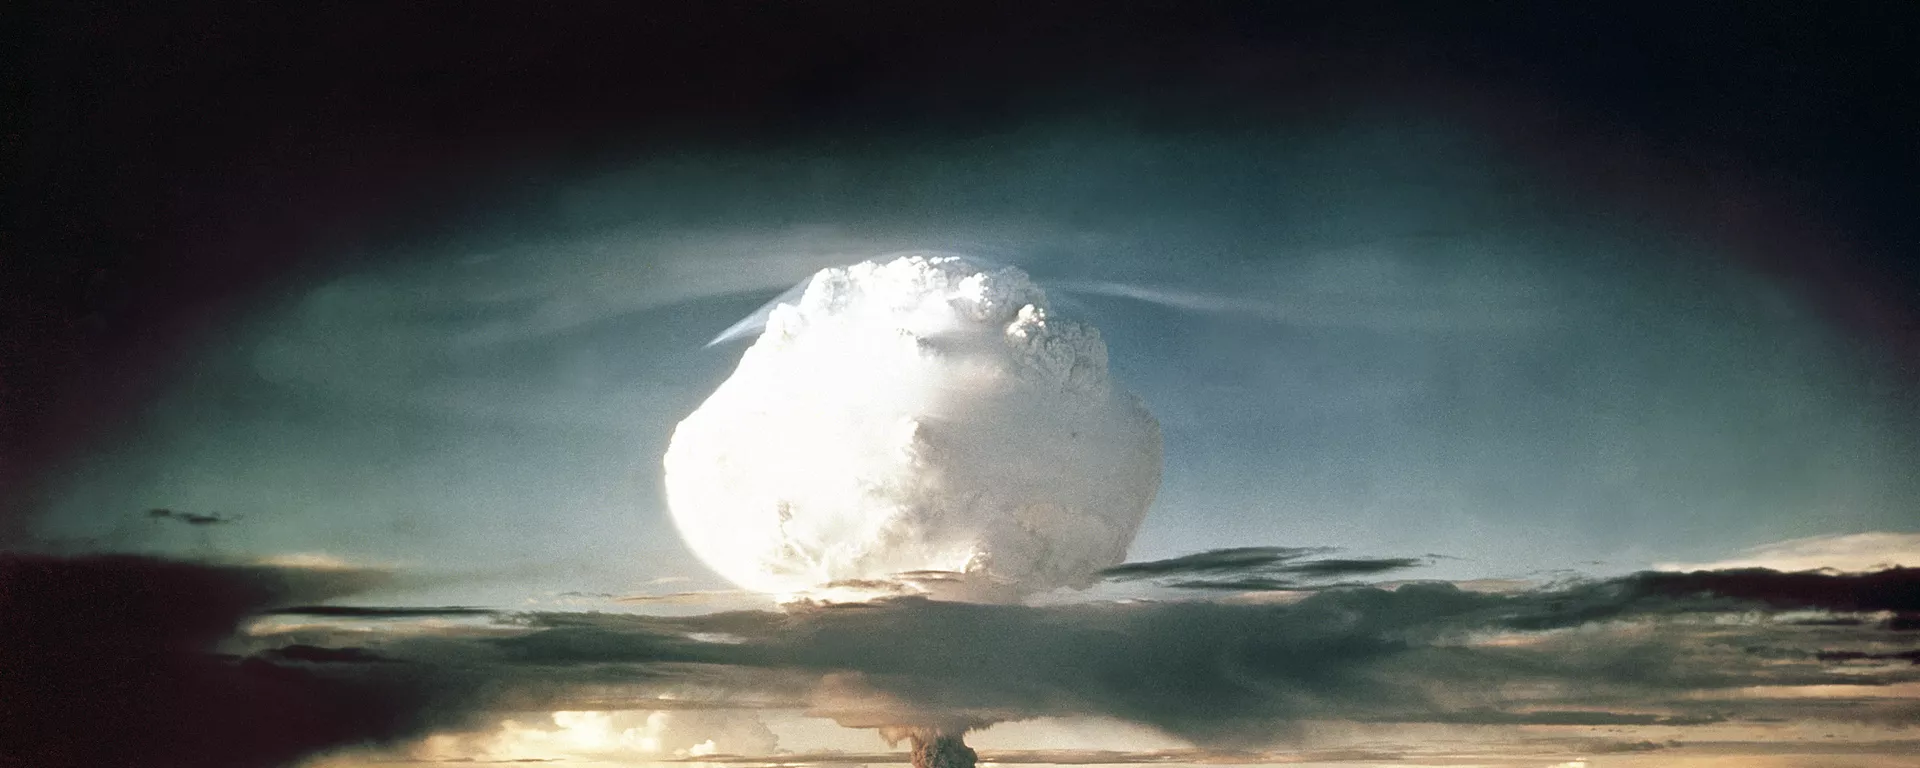 The mushroom cloud from Ivy Mike (codename given to the test) rises above the Pacific Ocean over the Enewetak Atoll in the Marshall Islands on November 1, 1952 at 7:15 am (local time) - Sputnik International, 1920, 29.08.2023